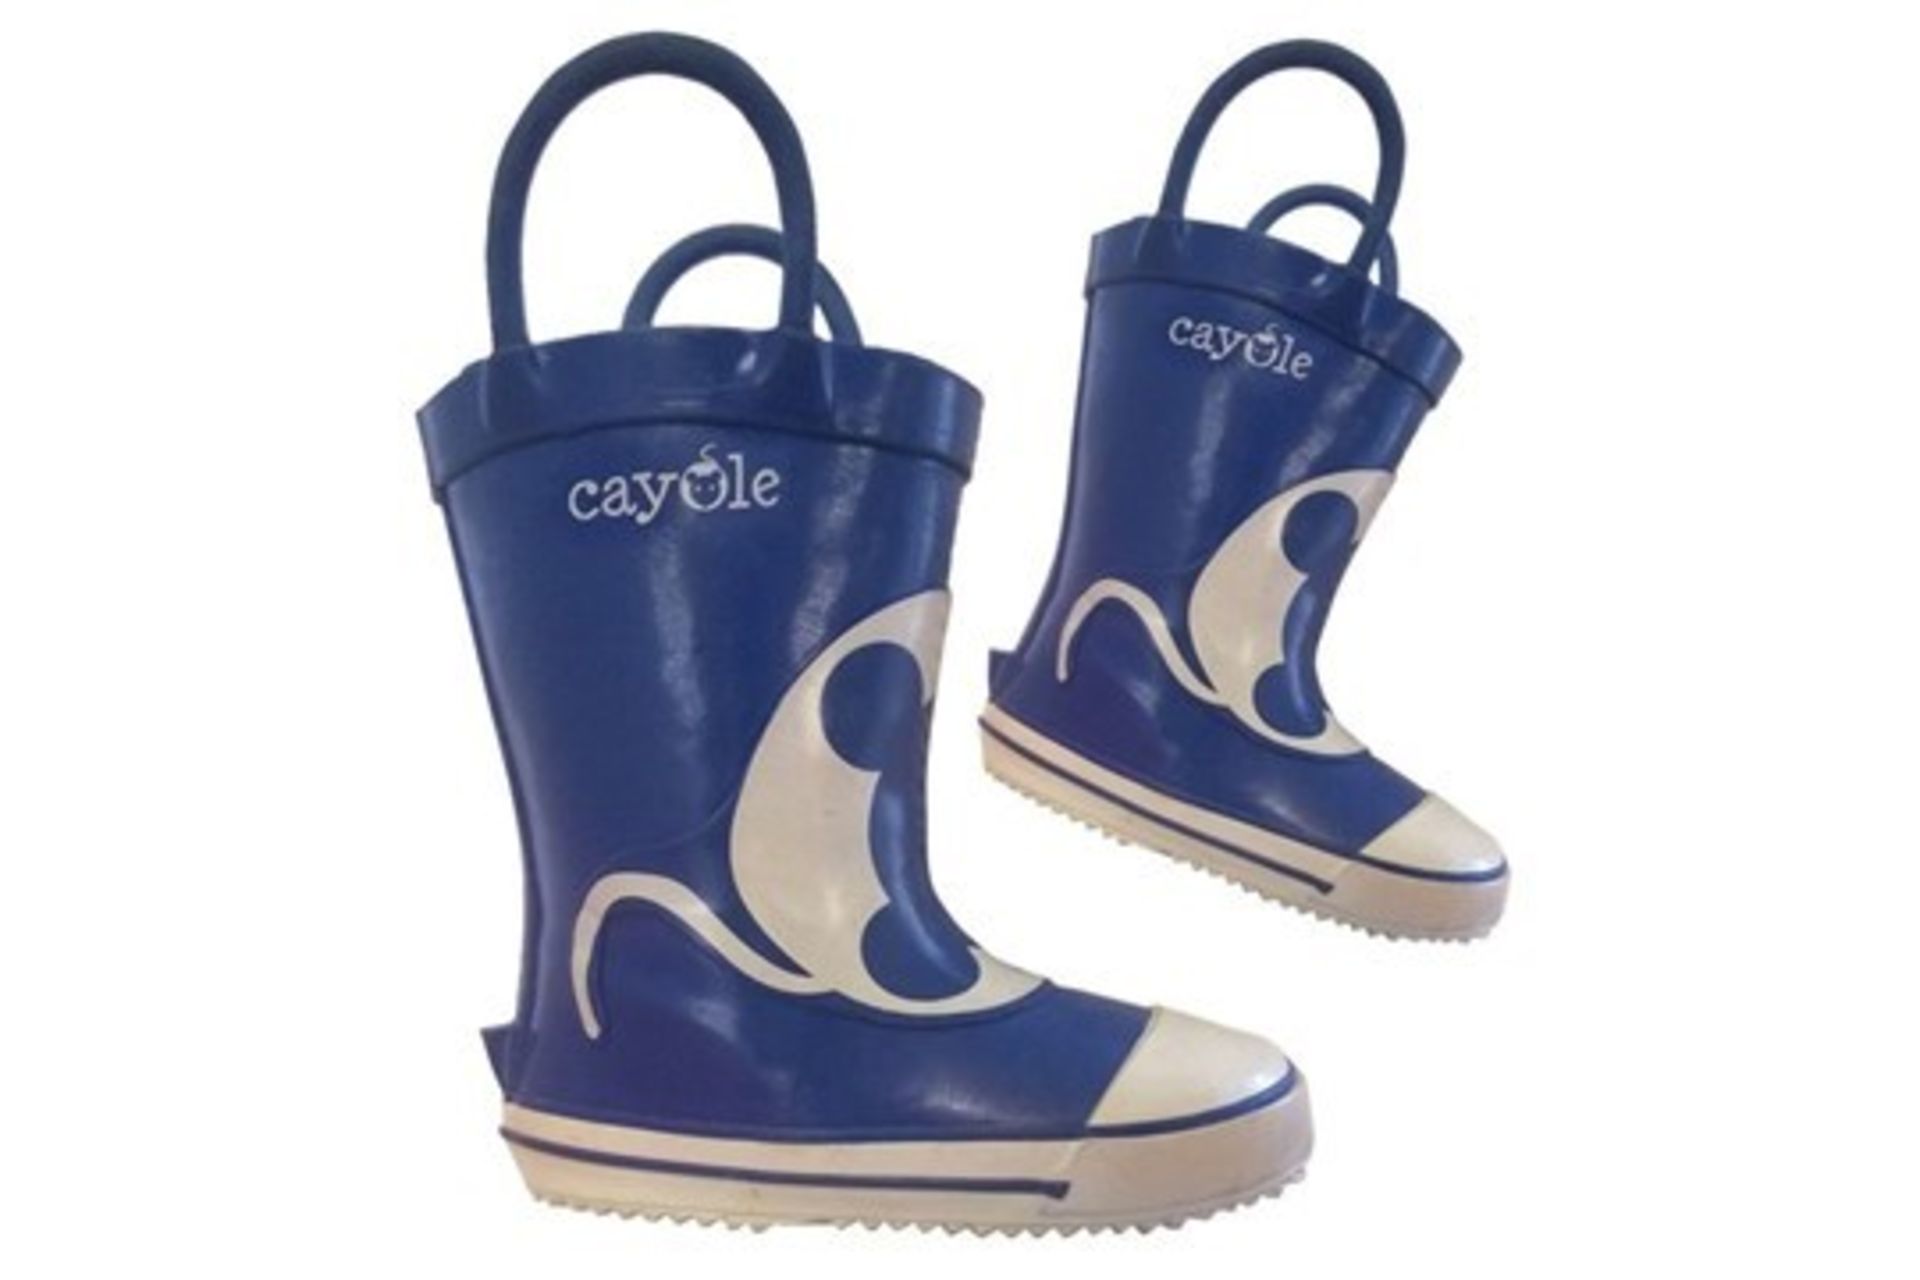 Brand New Pair of Cayole Mouse Design Kids Wellington Boots with Handles UK Size 5 RRP £18